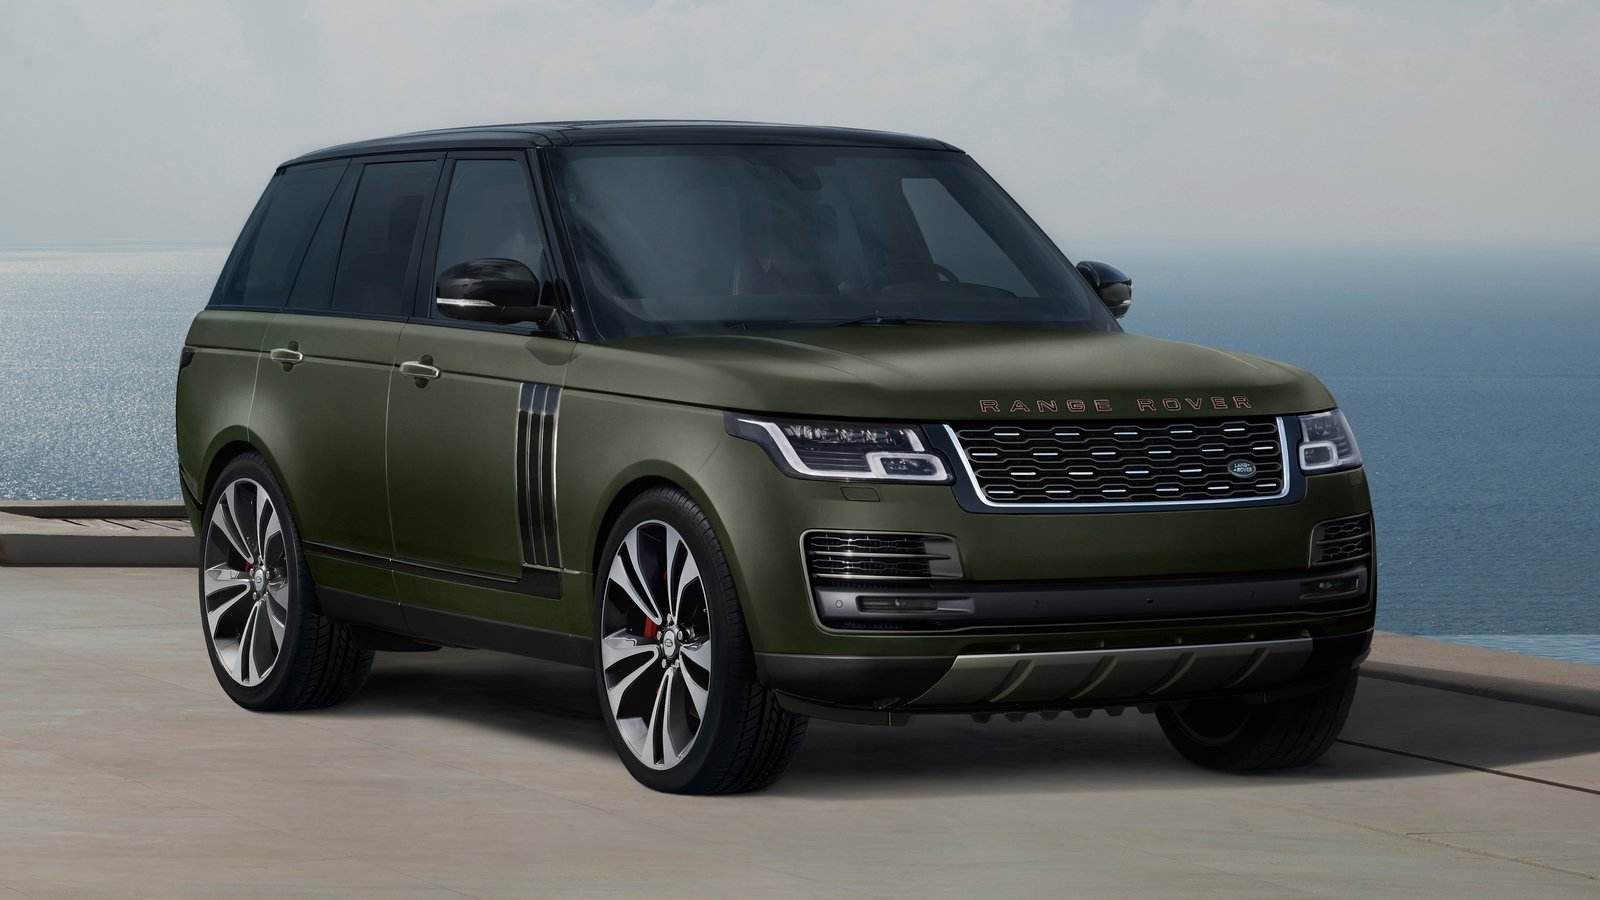  Range Rover SVAutobiography Ultimate editions debut, V8 and hybrid powertrains on offer